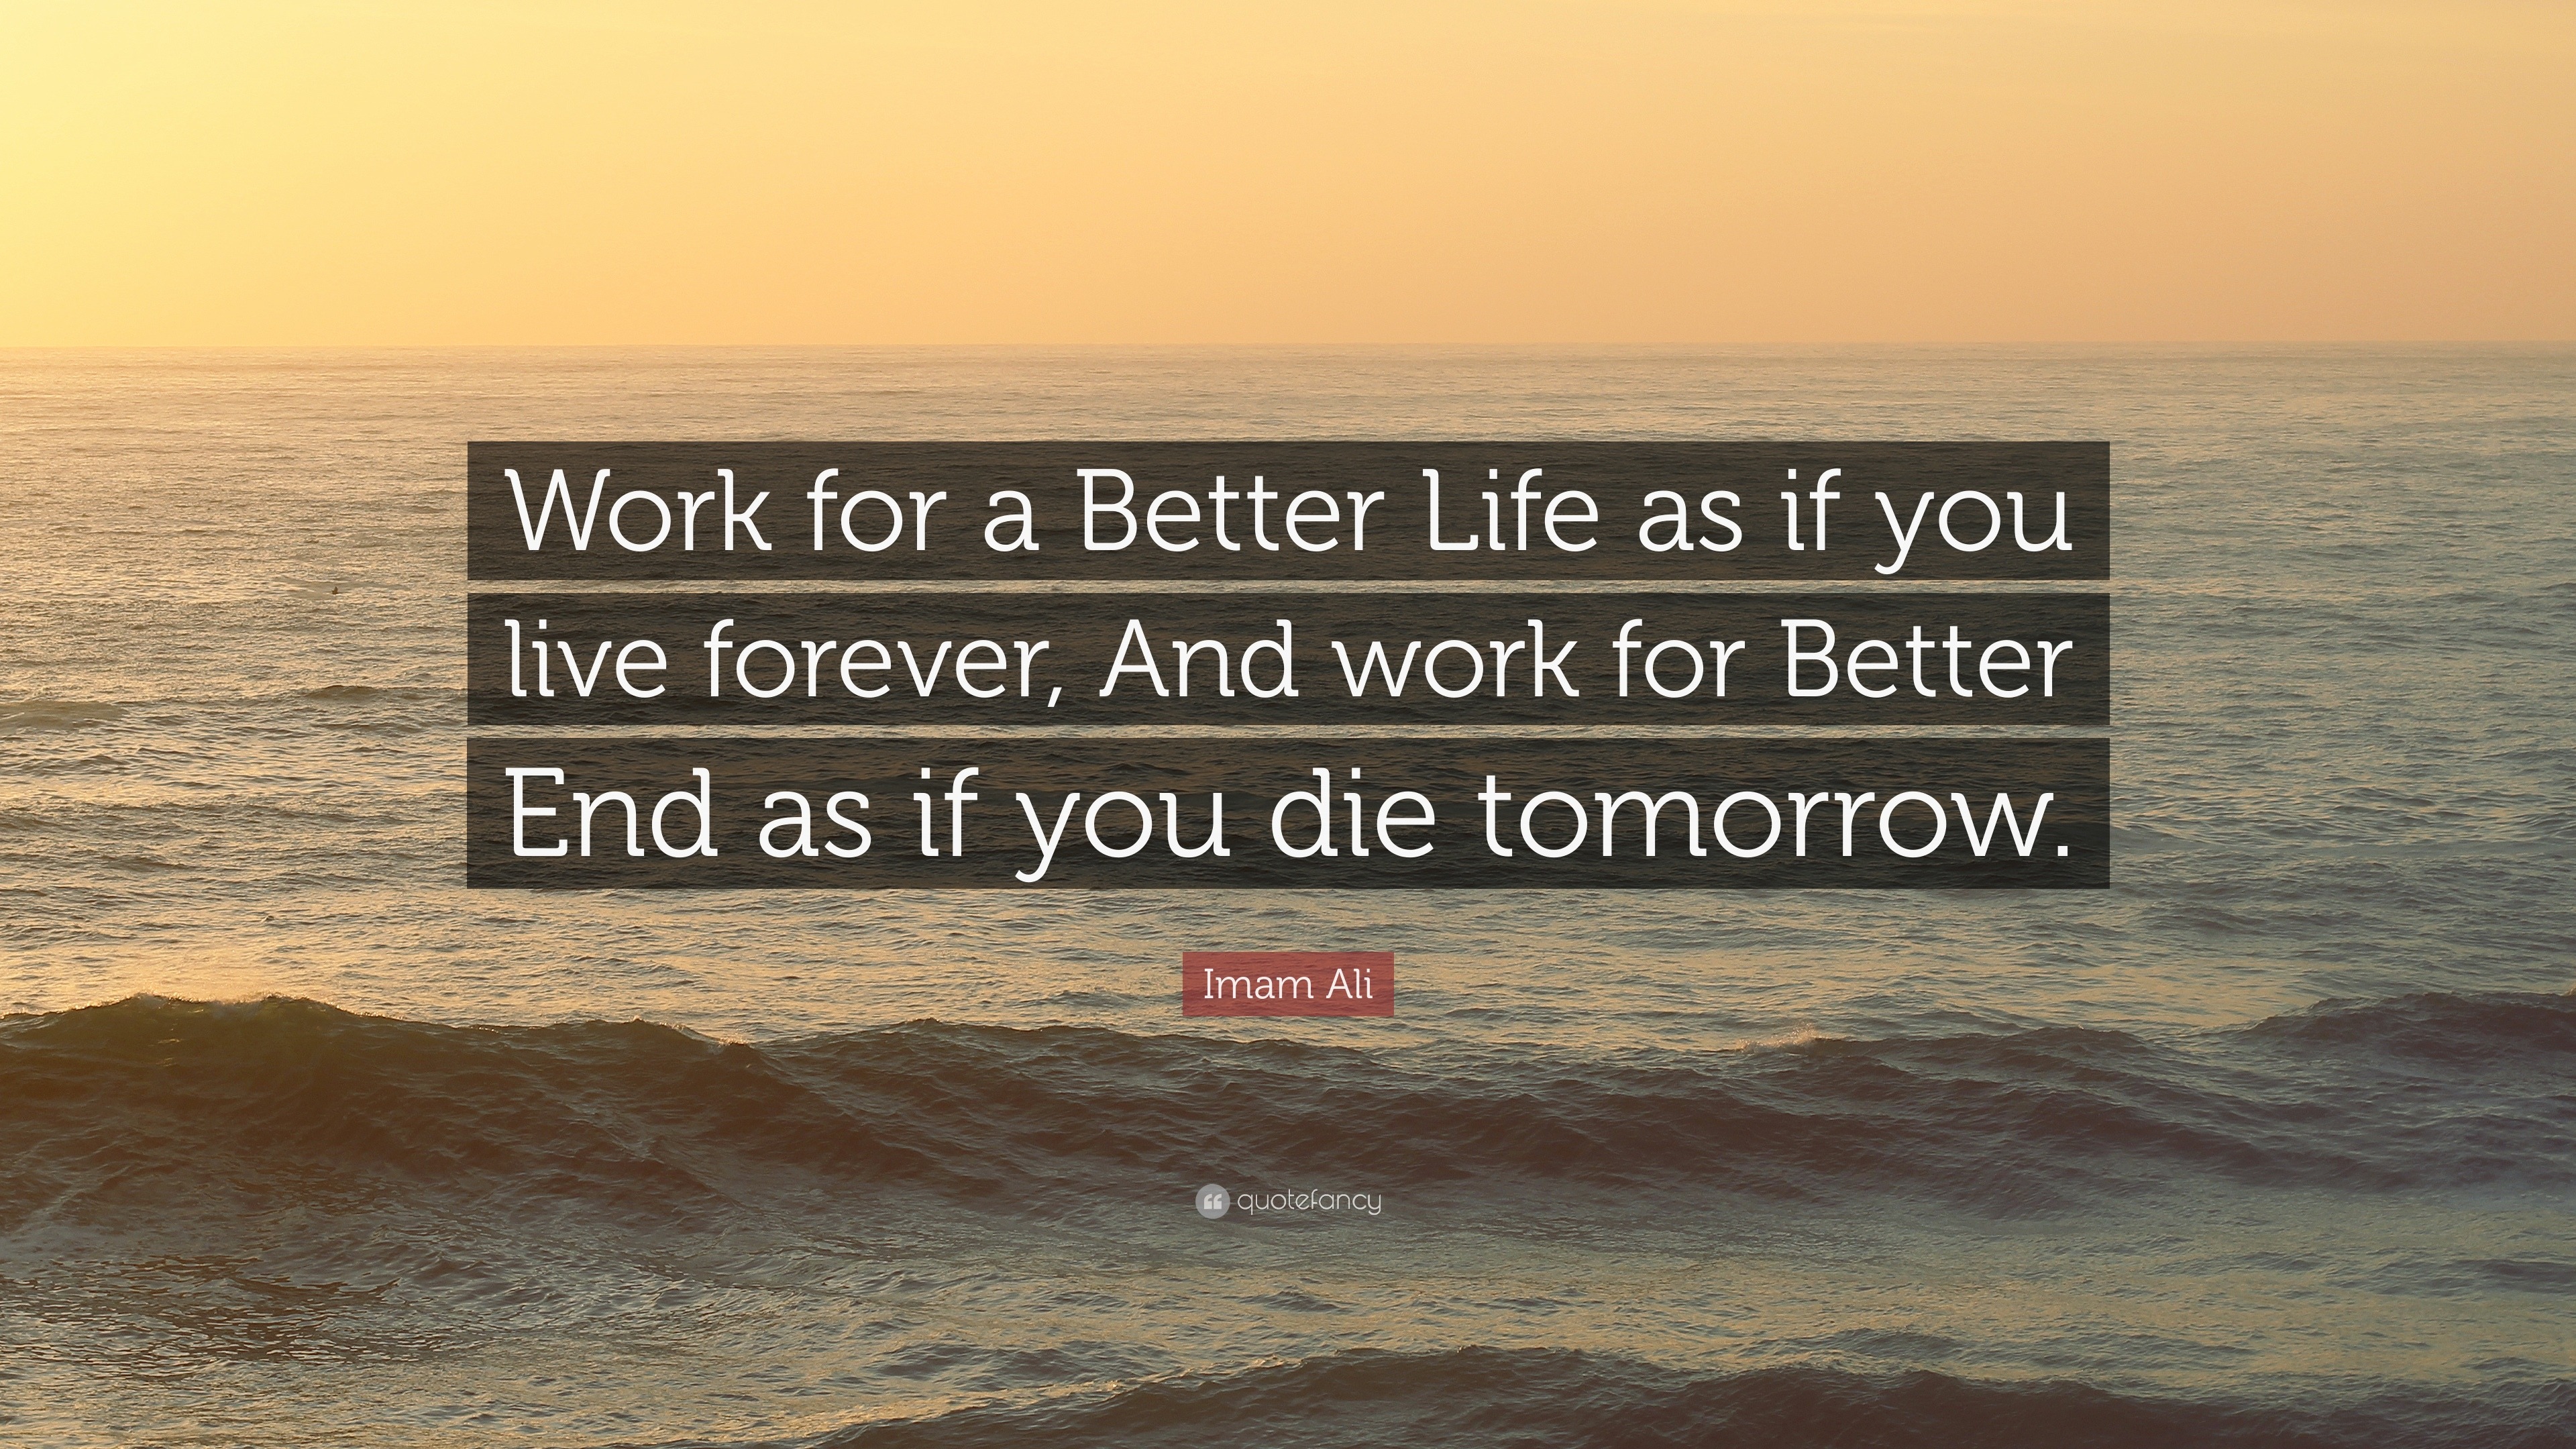 Imam Ali Quote Work For A Better Life As If You Live Forever And Work For